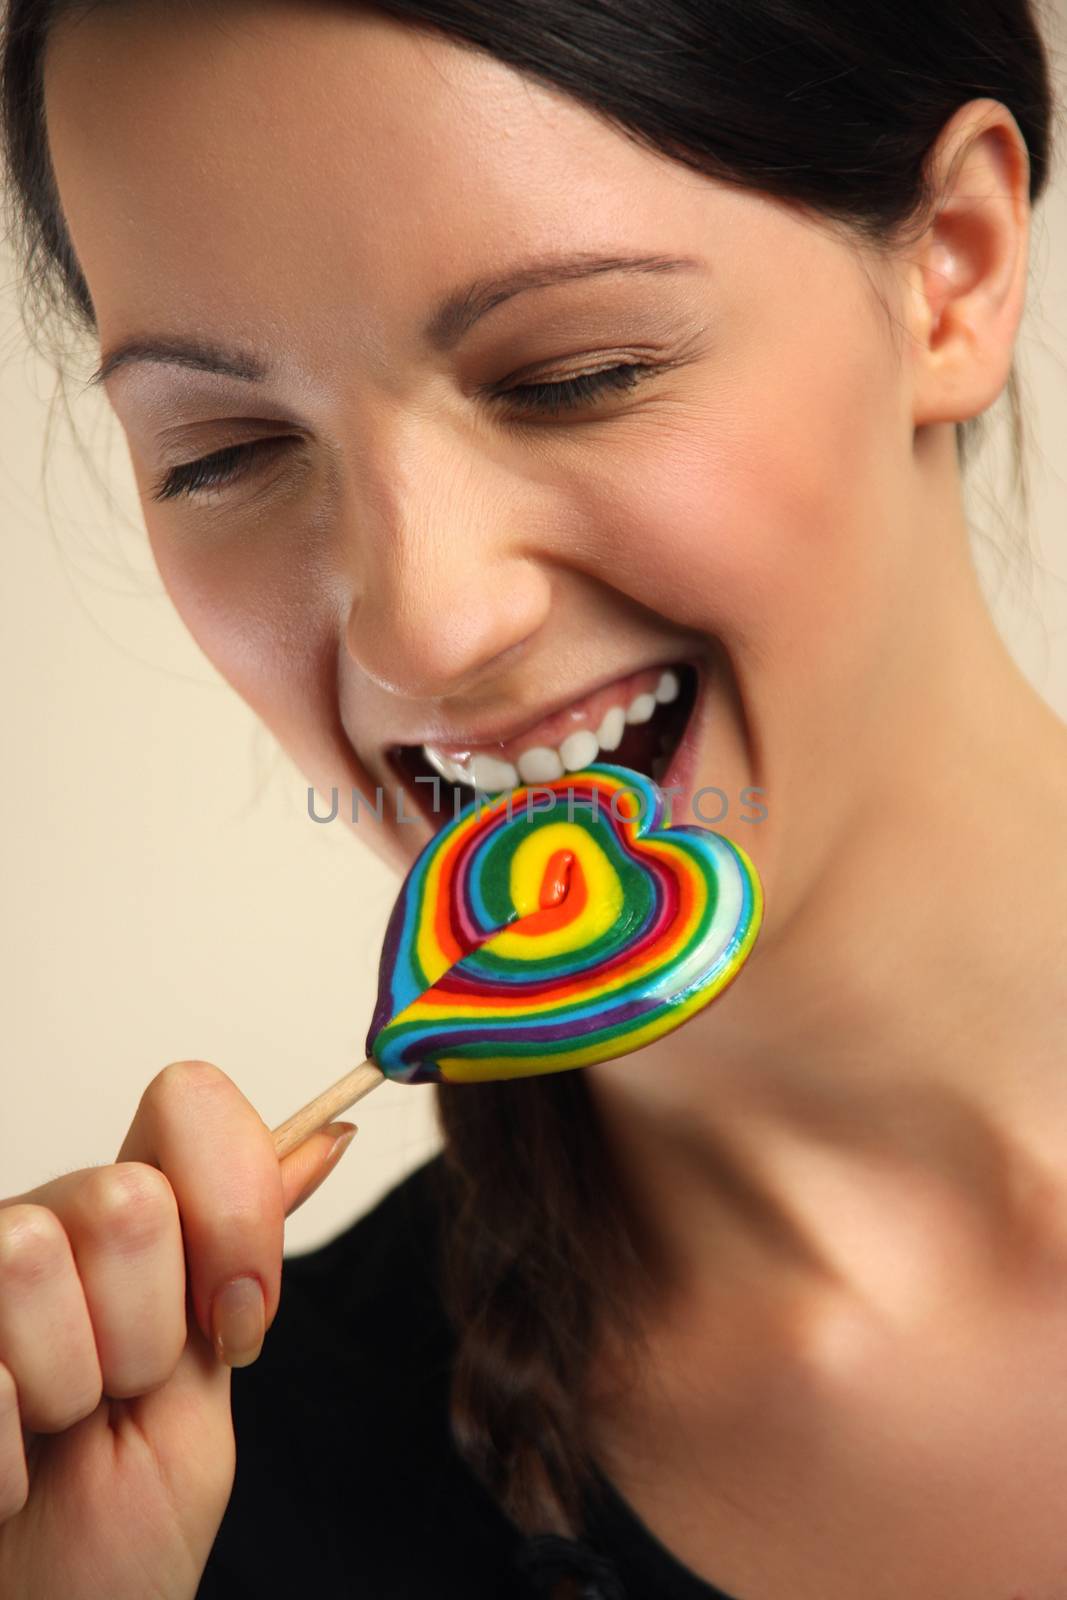 Girl licking a coloful lollipop.